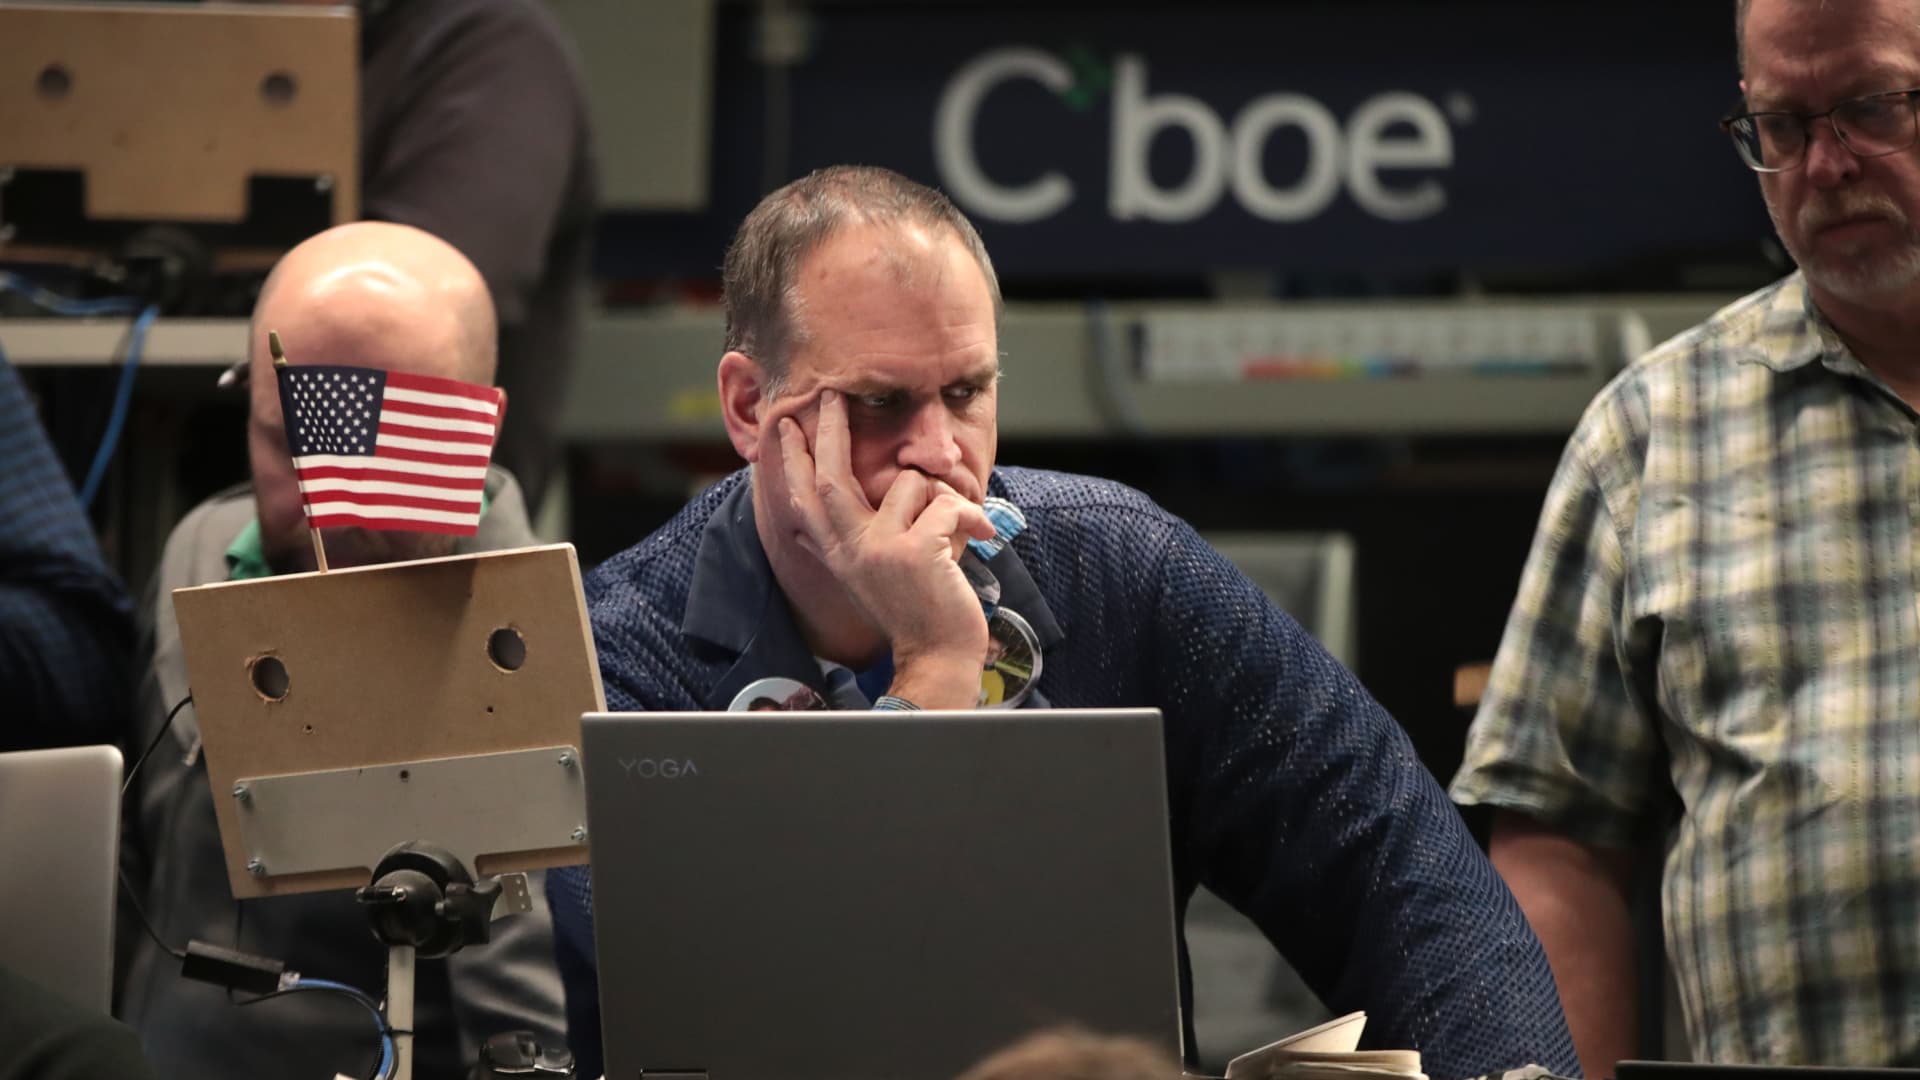 Exchange operator Cboe is a buy as recession chances rise, Morgan Stanley says